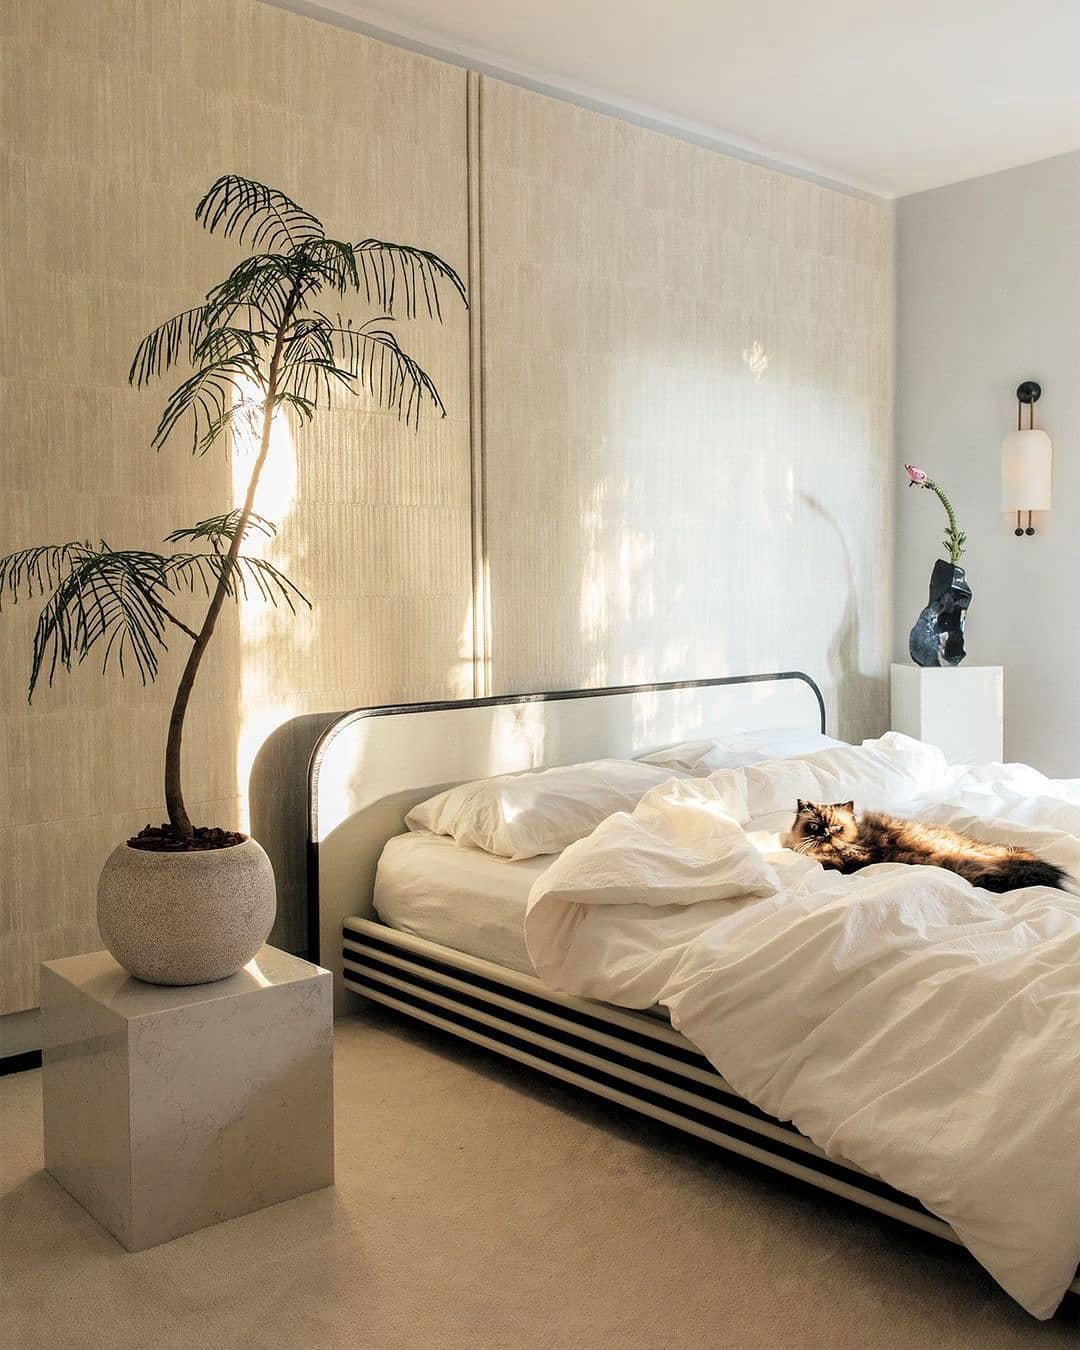 image  1 Interior Design District - We can’t get enough of Mark Grattan’s (#markgrattan) light-filled, Mexico City